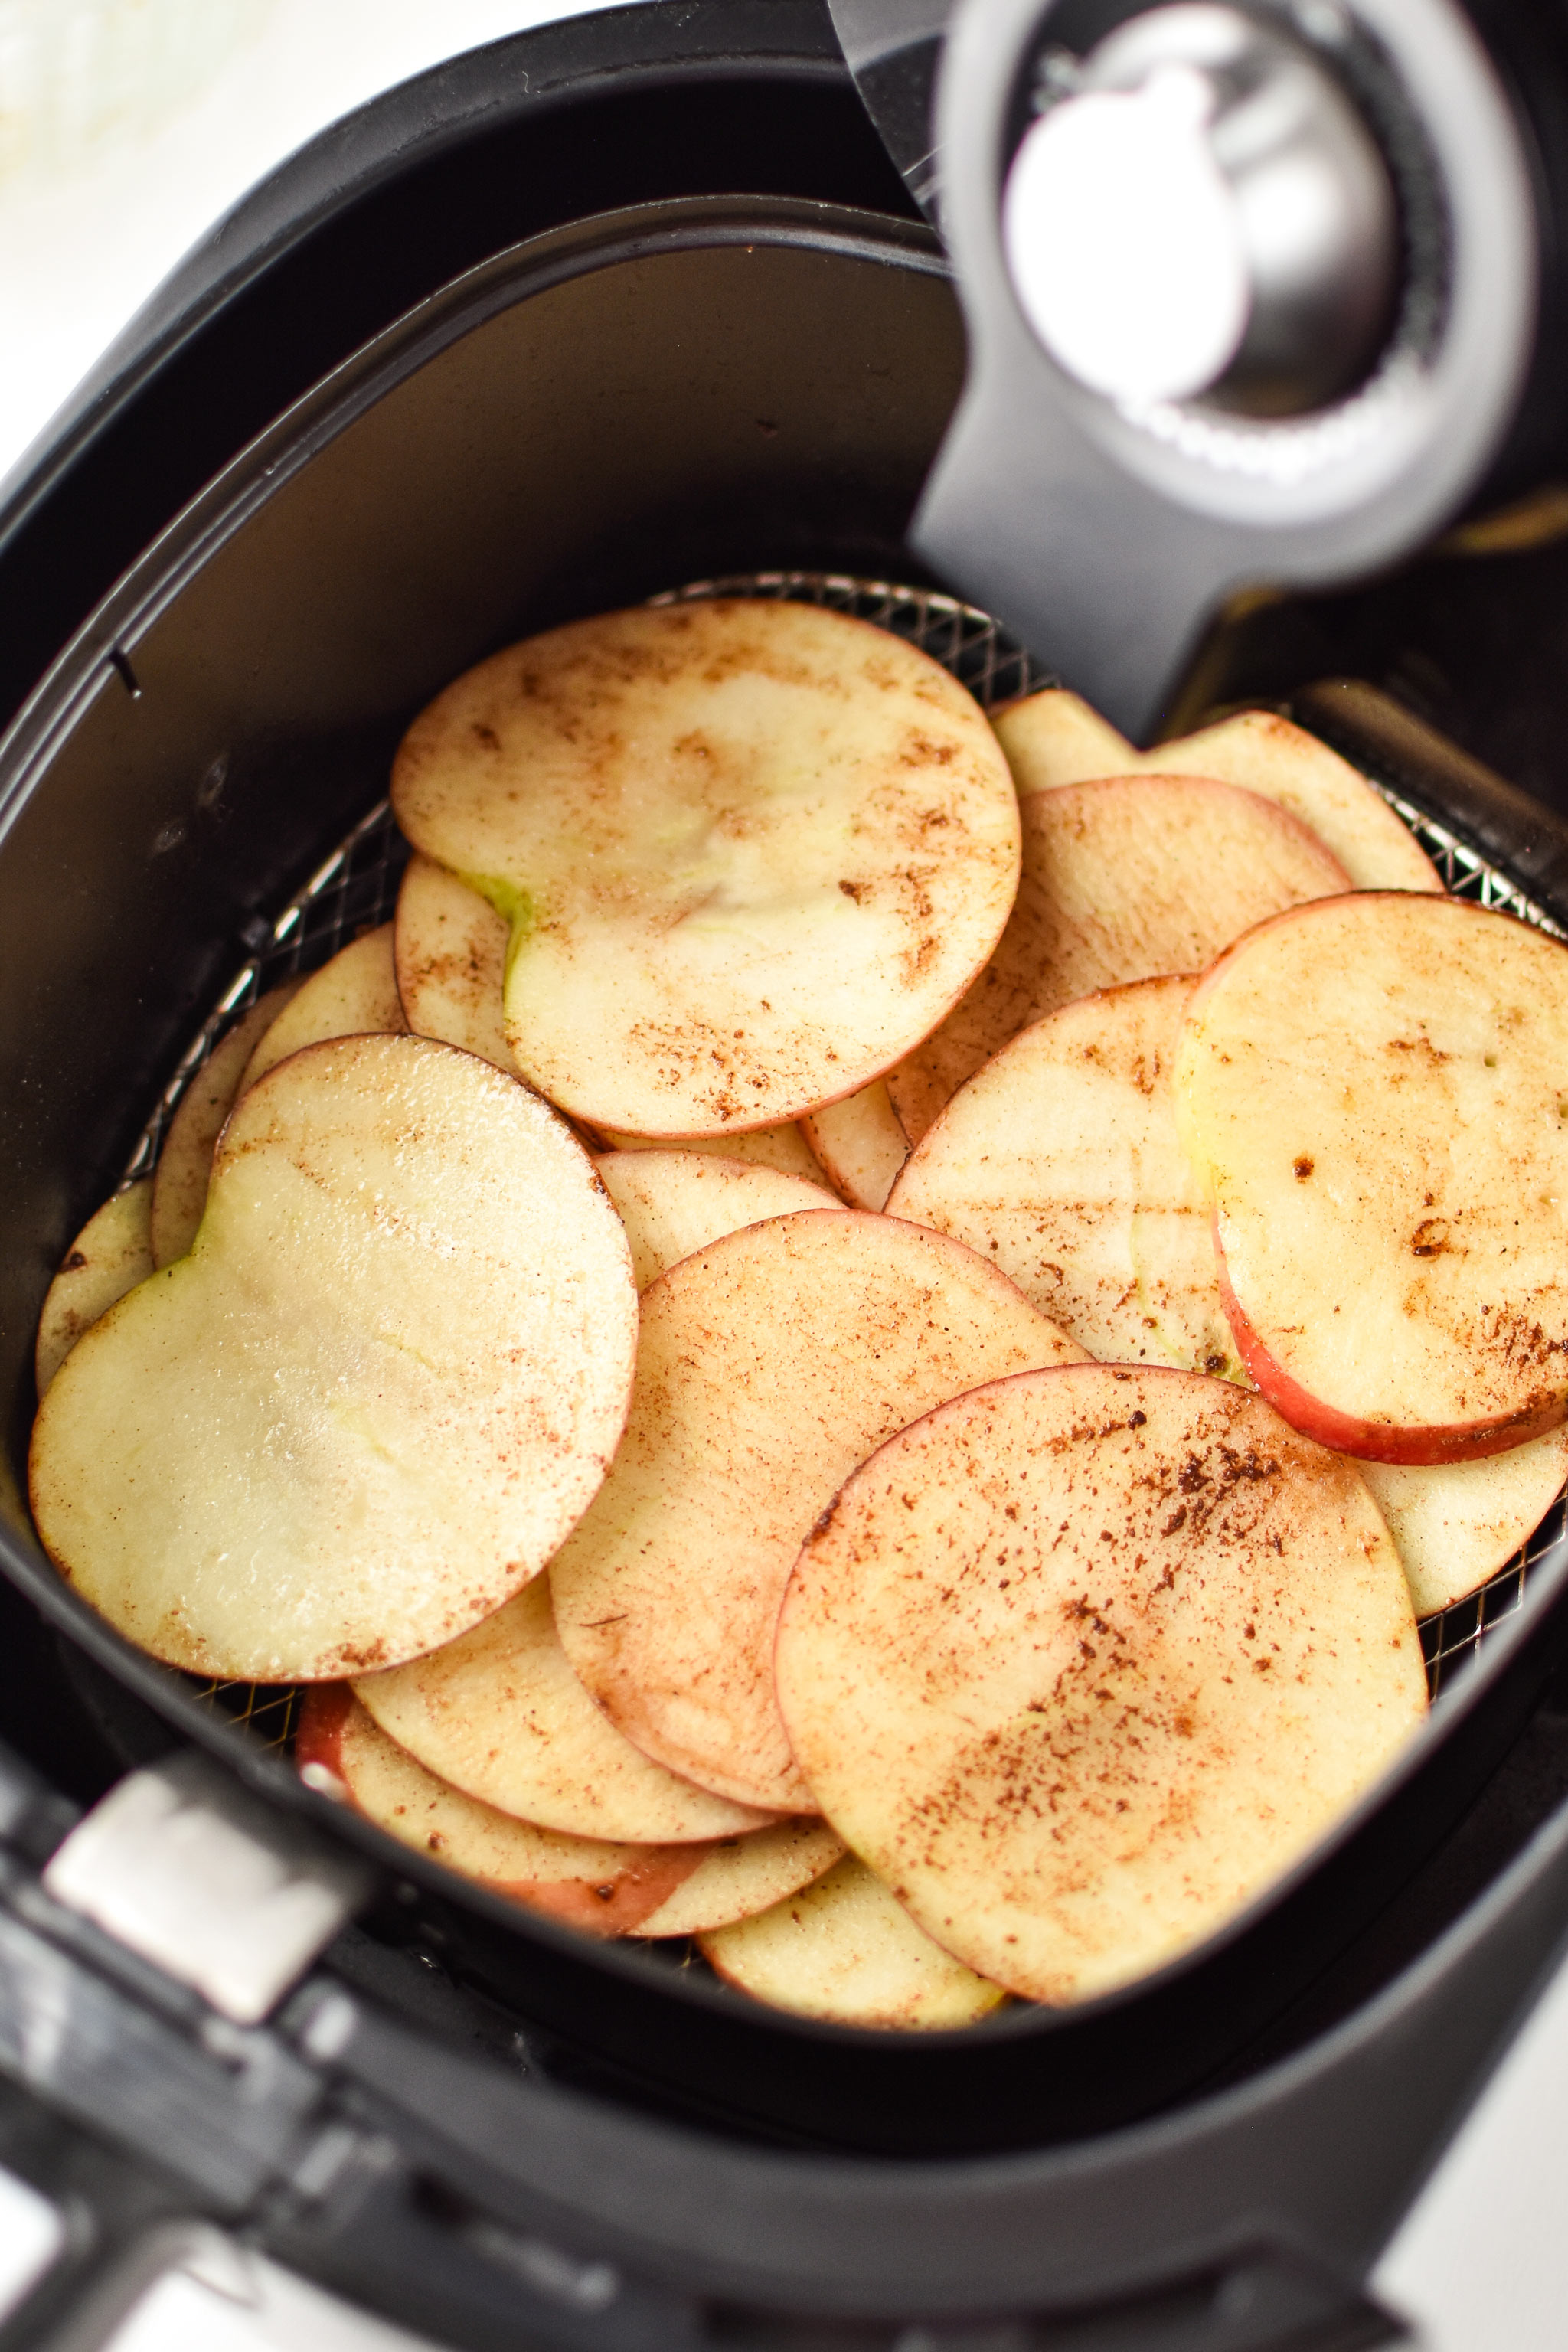 Freshly sliced apples going into the air fryer to make apple chips.